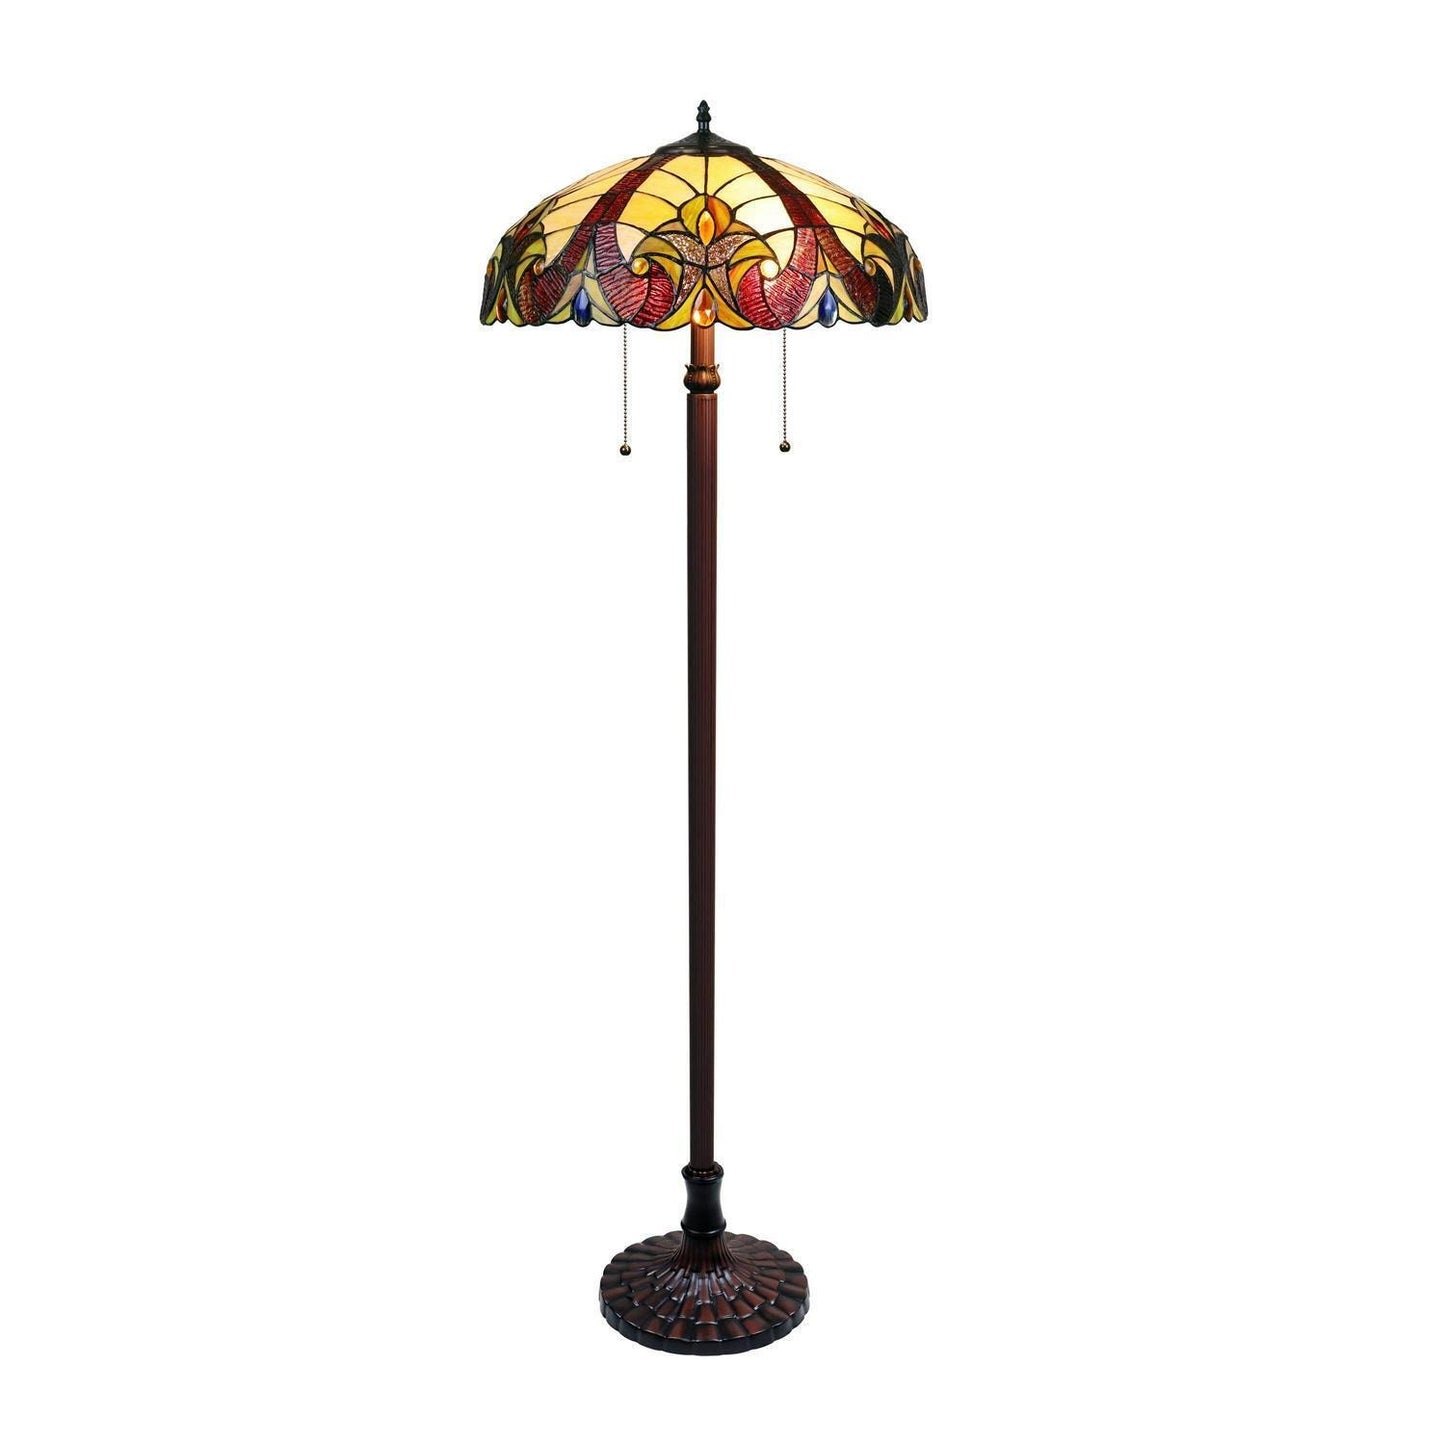 Amber Victorian Traditional Floor Lamp Tiffany Style Stained Glass 64.5in